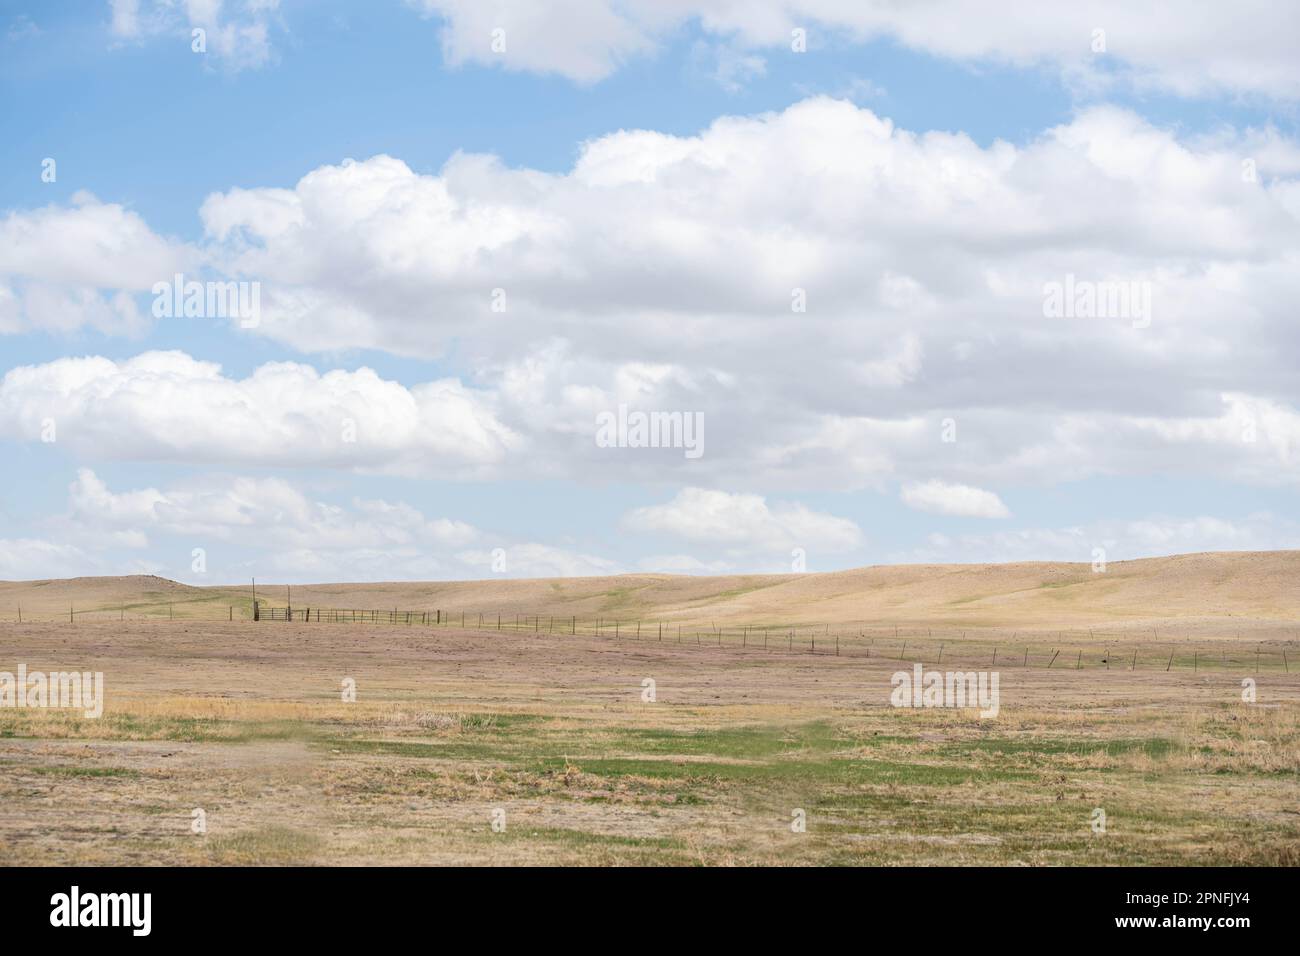 An overlooking view in Terry Bison Ranch, Wyoming Stock Photo